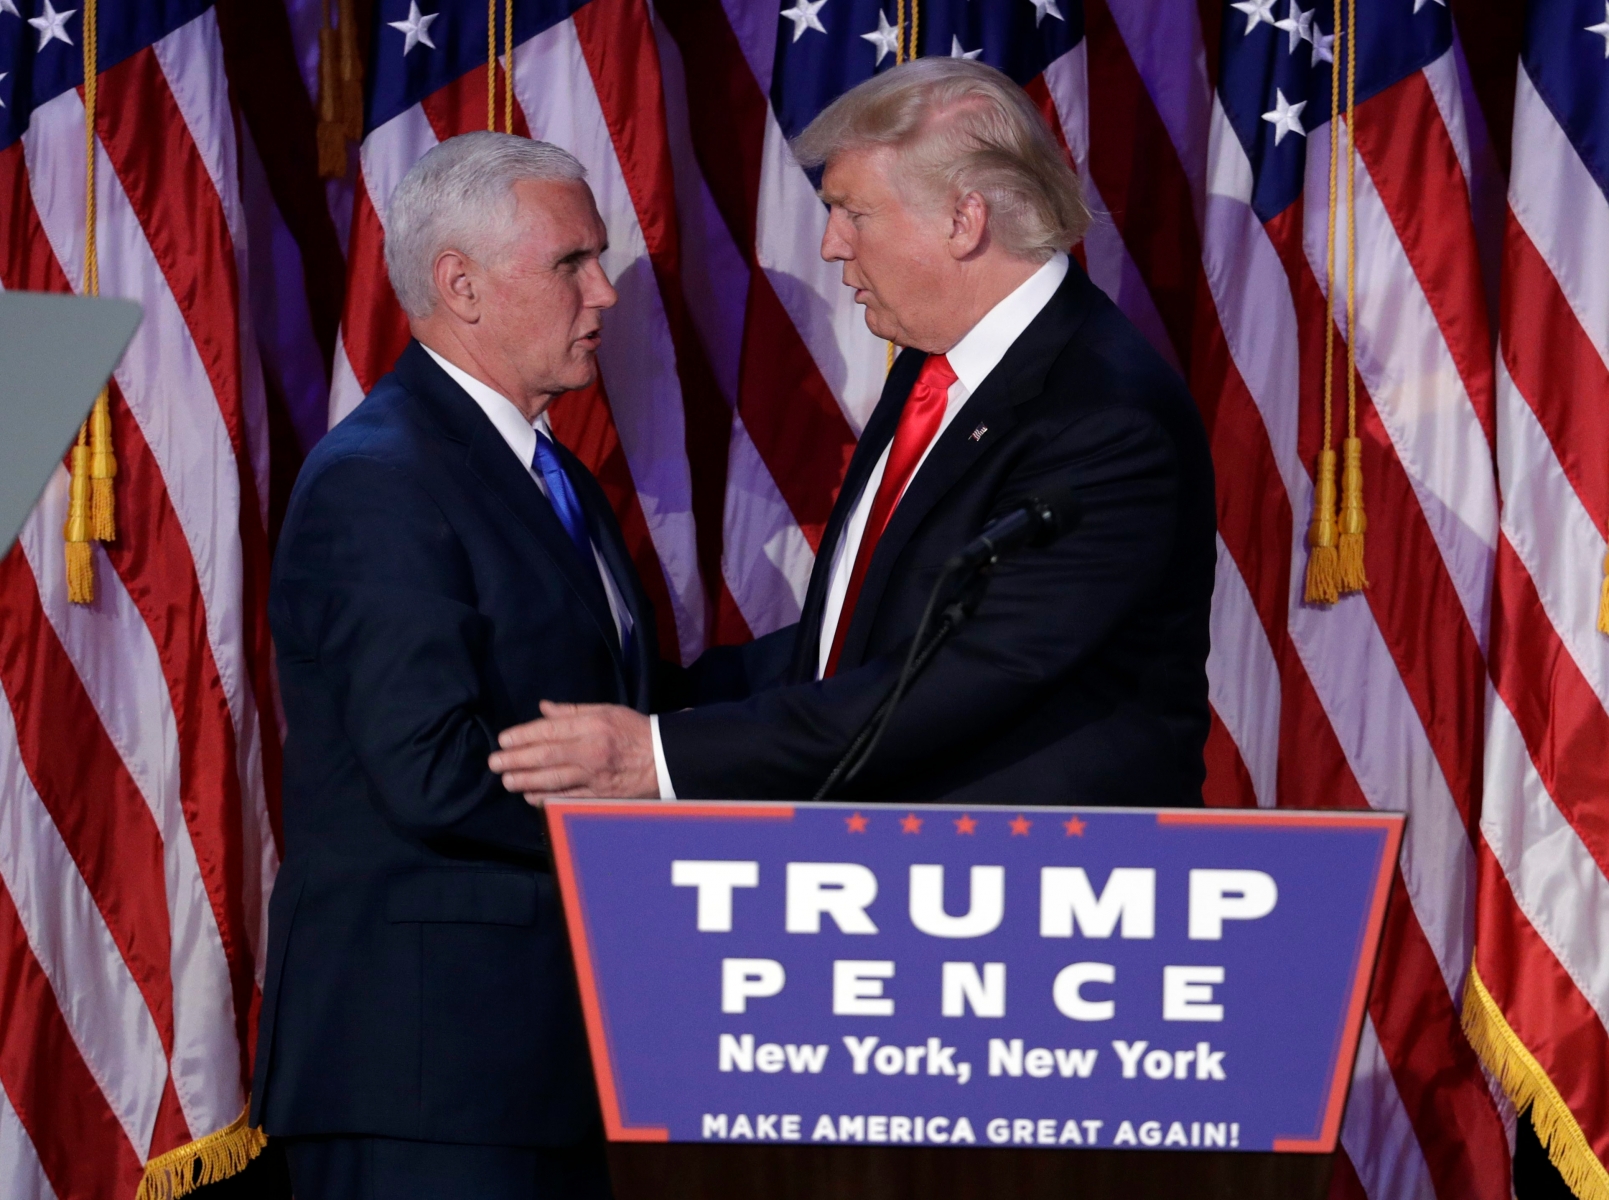 President-elect Donald Trump, right, shakes hands with Vice-President-elect Mike Pence during his election night rally, Wednesday, Nov. 9, 2016, in New York. (AP Photo/John Locher) 2016 Election Trump